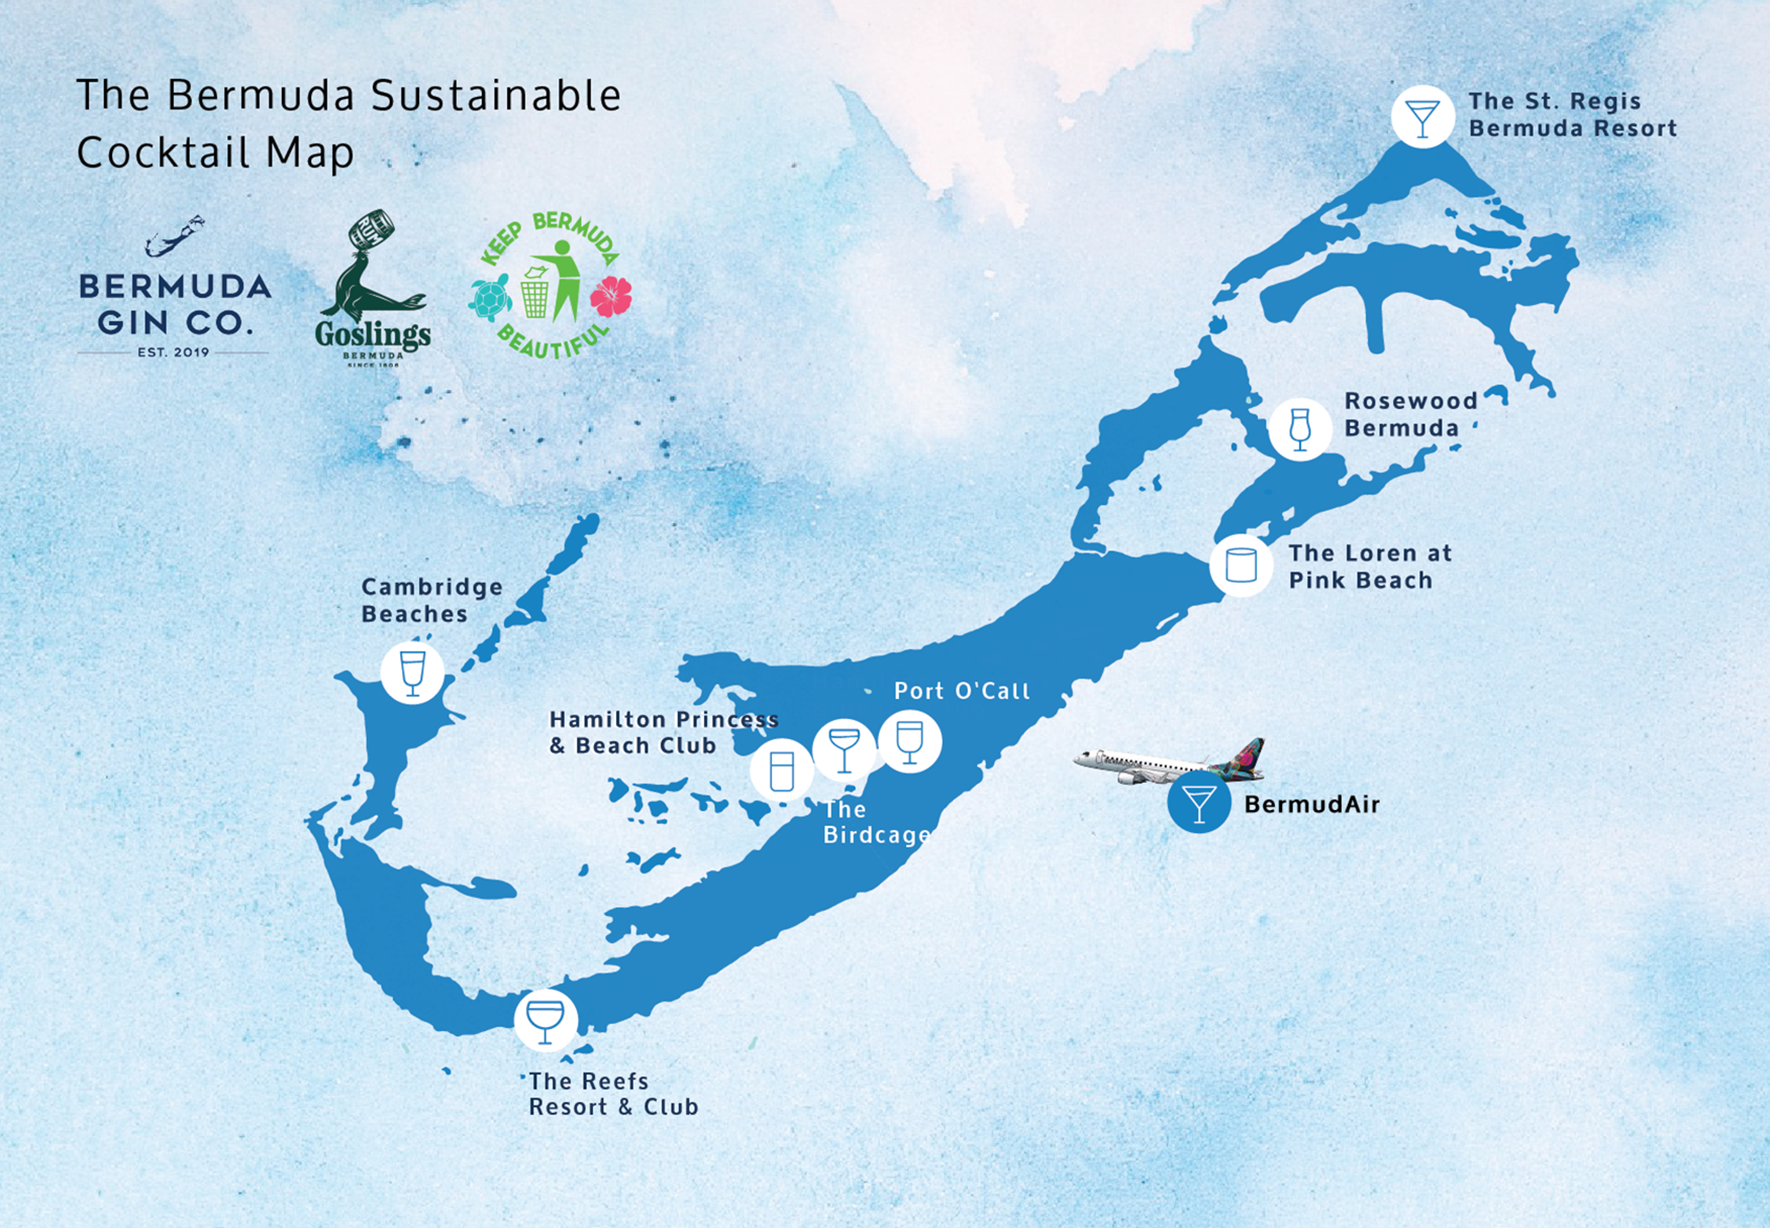 Bermuda Sustainable Cocktail Map